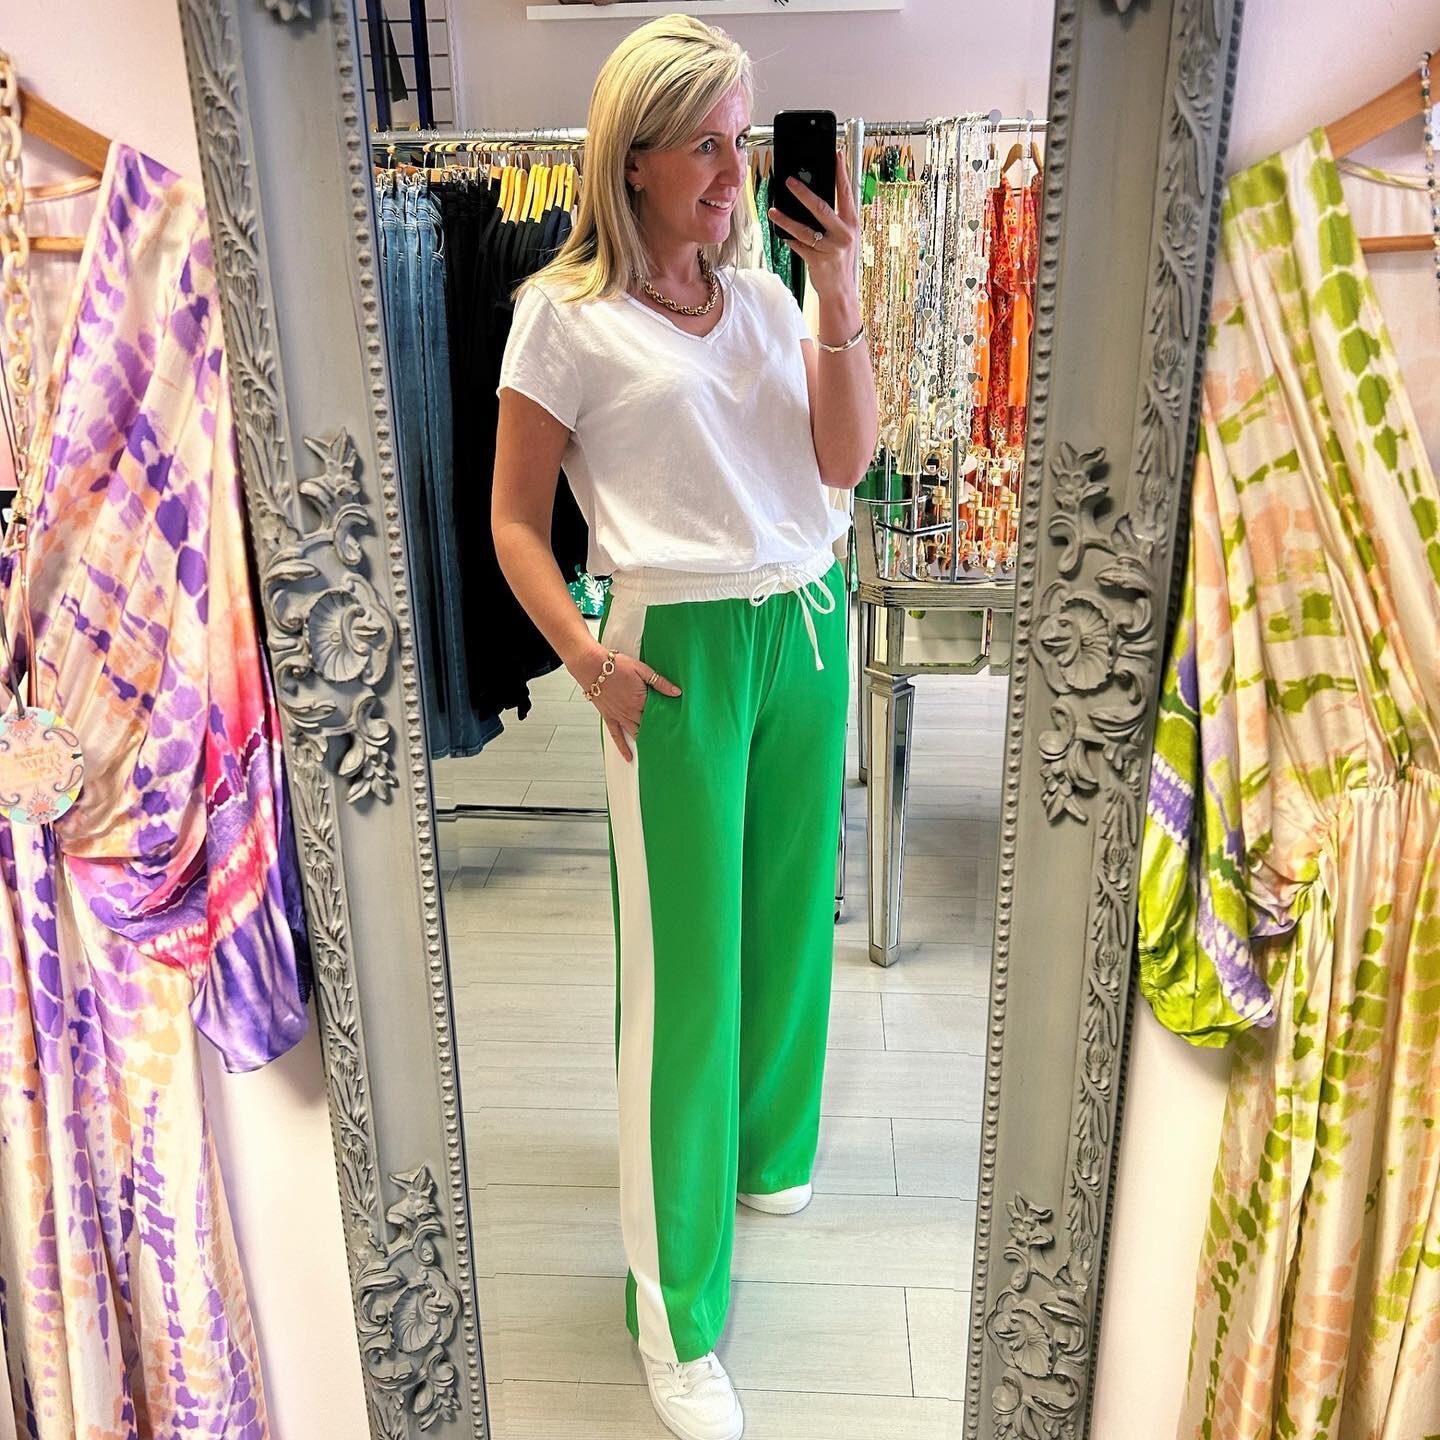 Our Suki wide leg trousers now available in apple green. Perfect pop of colour 💚
.
.
.
.
.
.
.
 #SpringFashion #WideLegTrousers #TransitionalWardrobe #SpringStyle #DressHappy #FashionOver30 #StyleOver40 #WomenWithStyle #StyleOver30 #StyleOver40 #Out